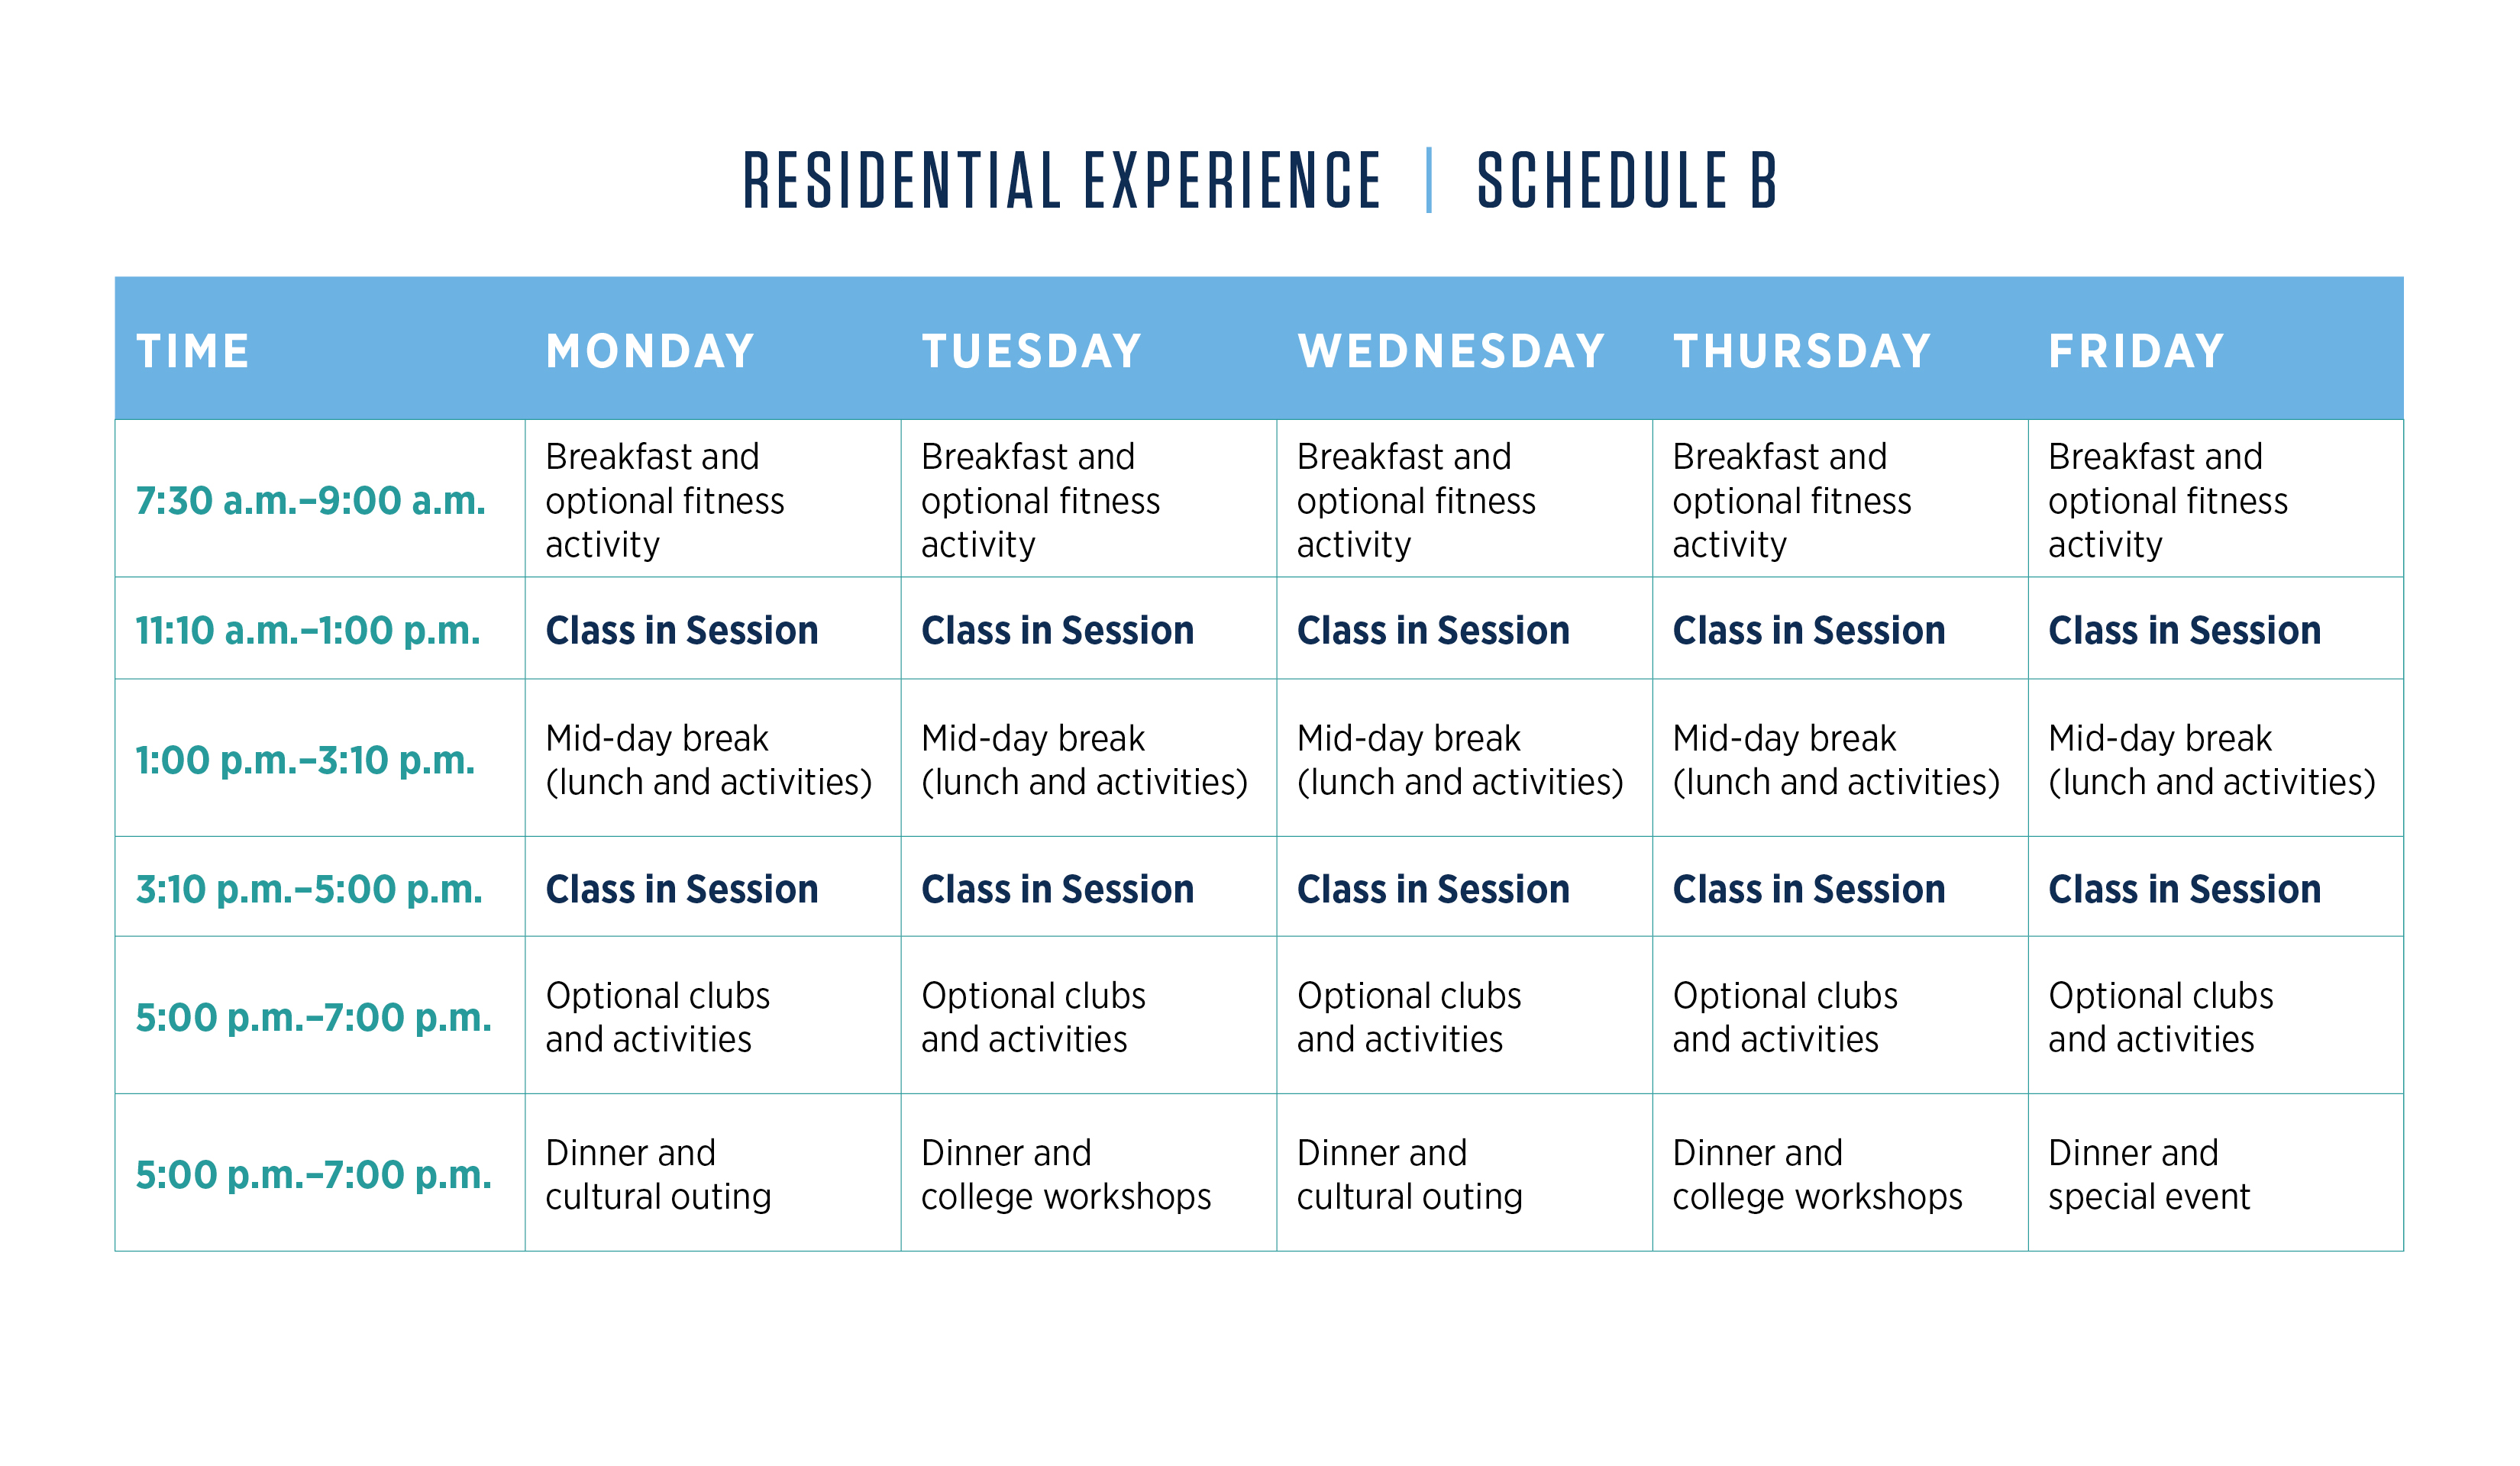 Enlargeable graphic showing Residential Experiance Schedule B